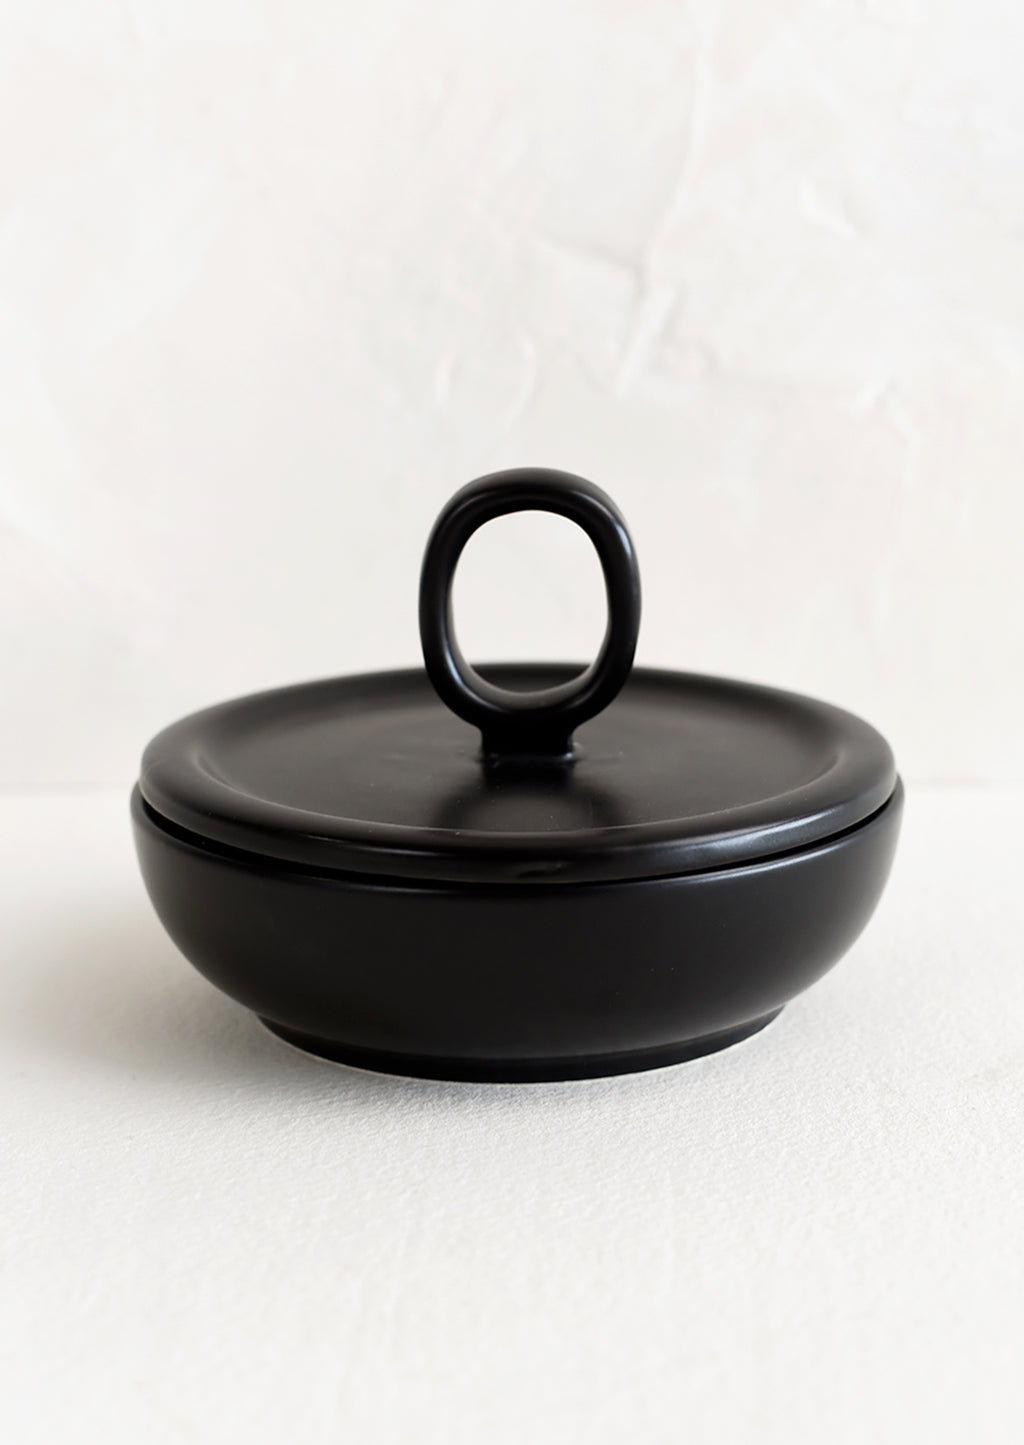 Black / Round: A round ceramic container in black with lid.